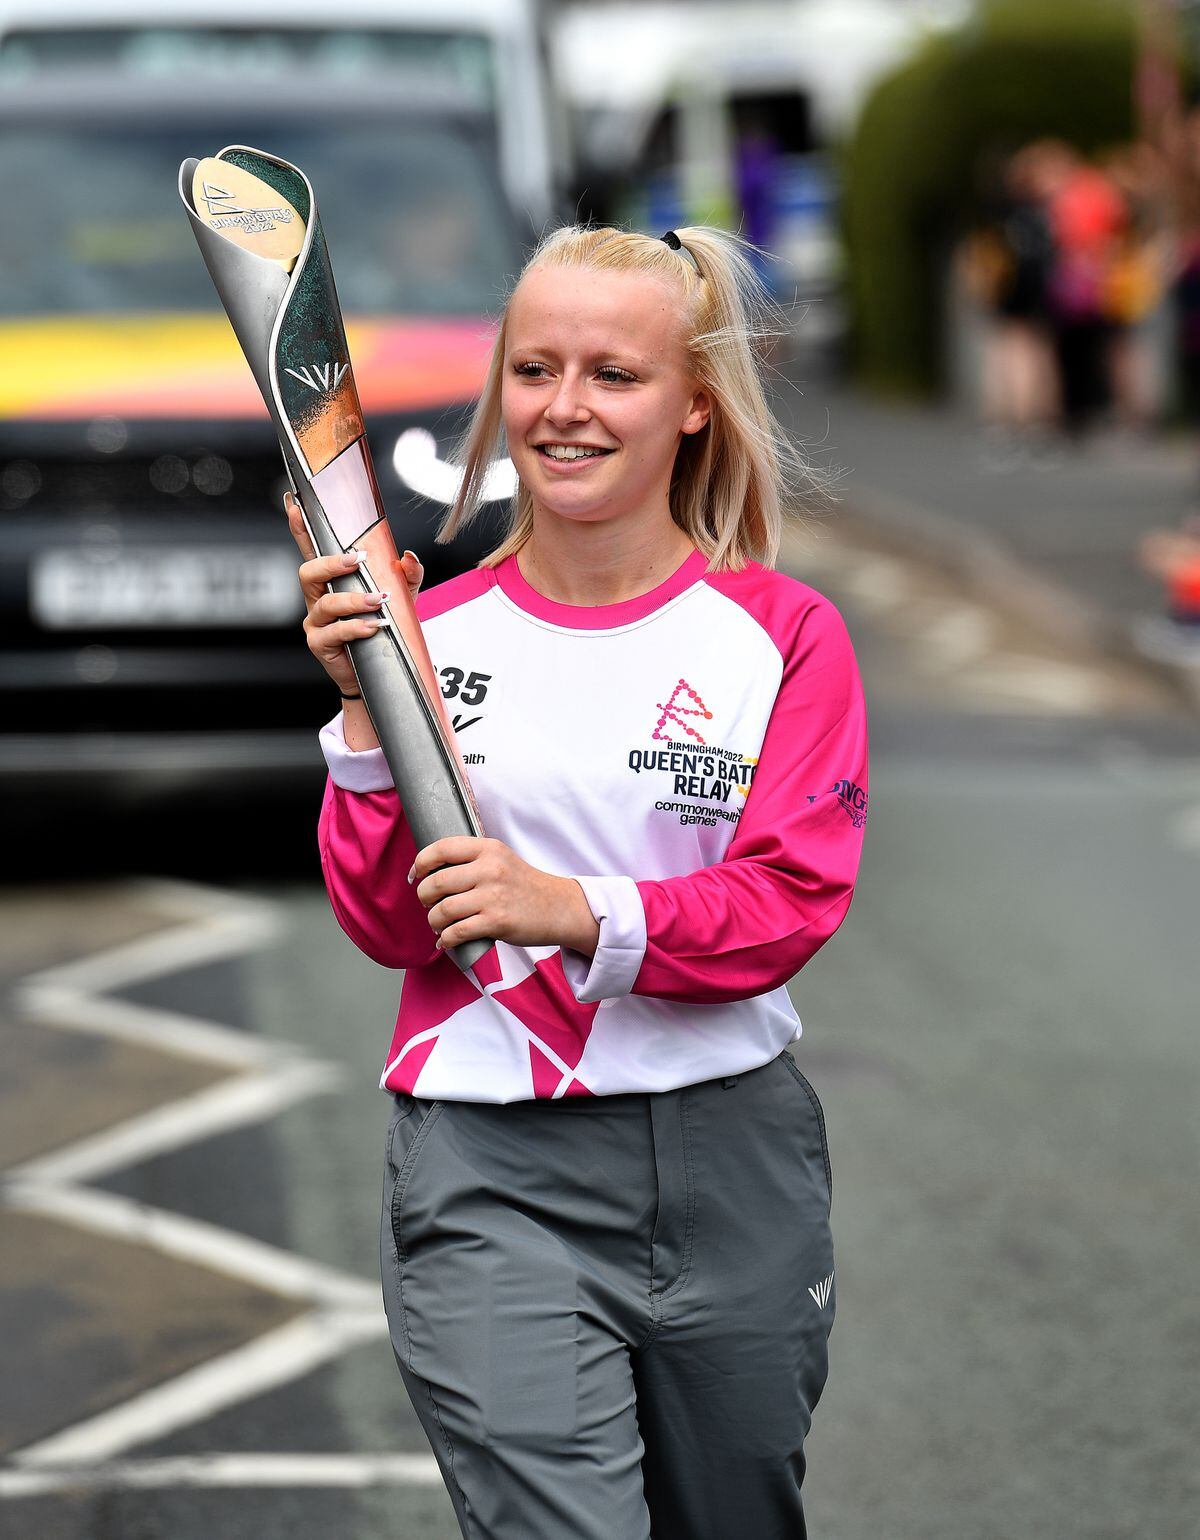 Millie Oliver carries the baton through Chasetown 